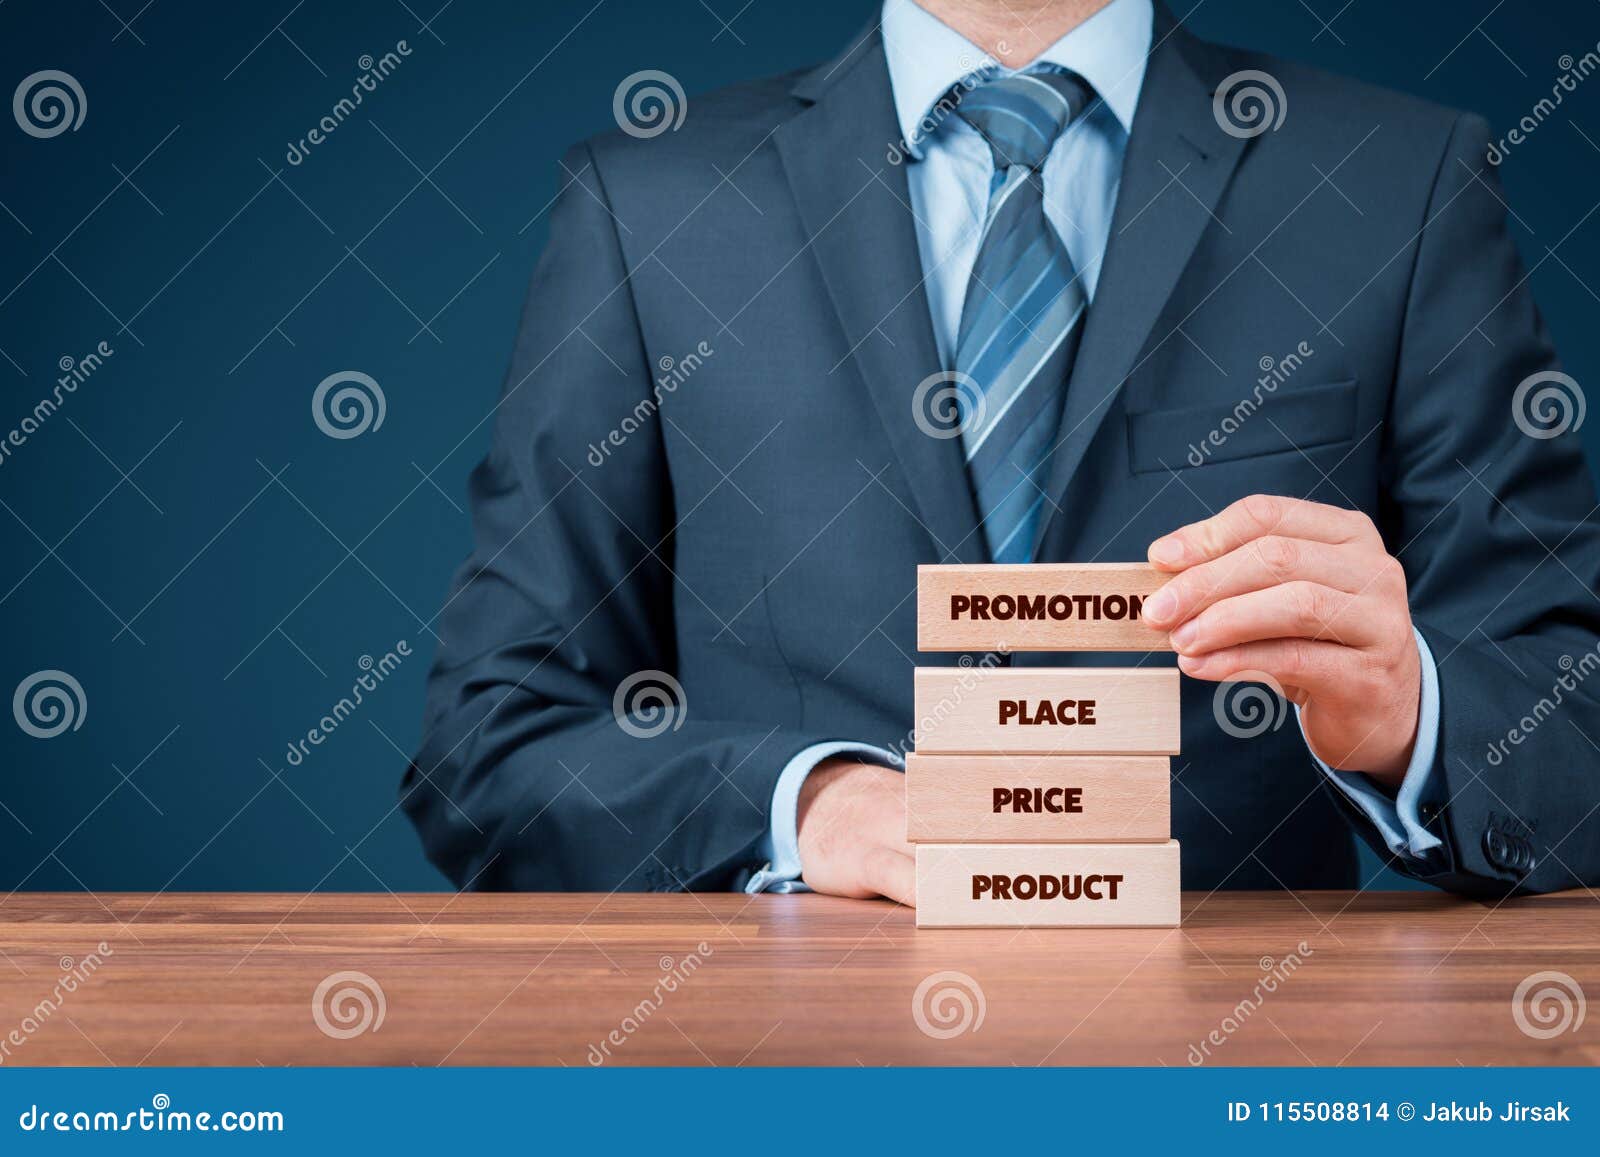 4 promotion. Product Price. Price to product. Product – Price –place -promotion. Pricing placing promotion.